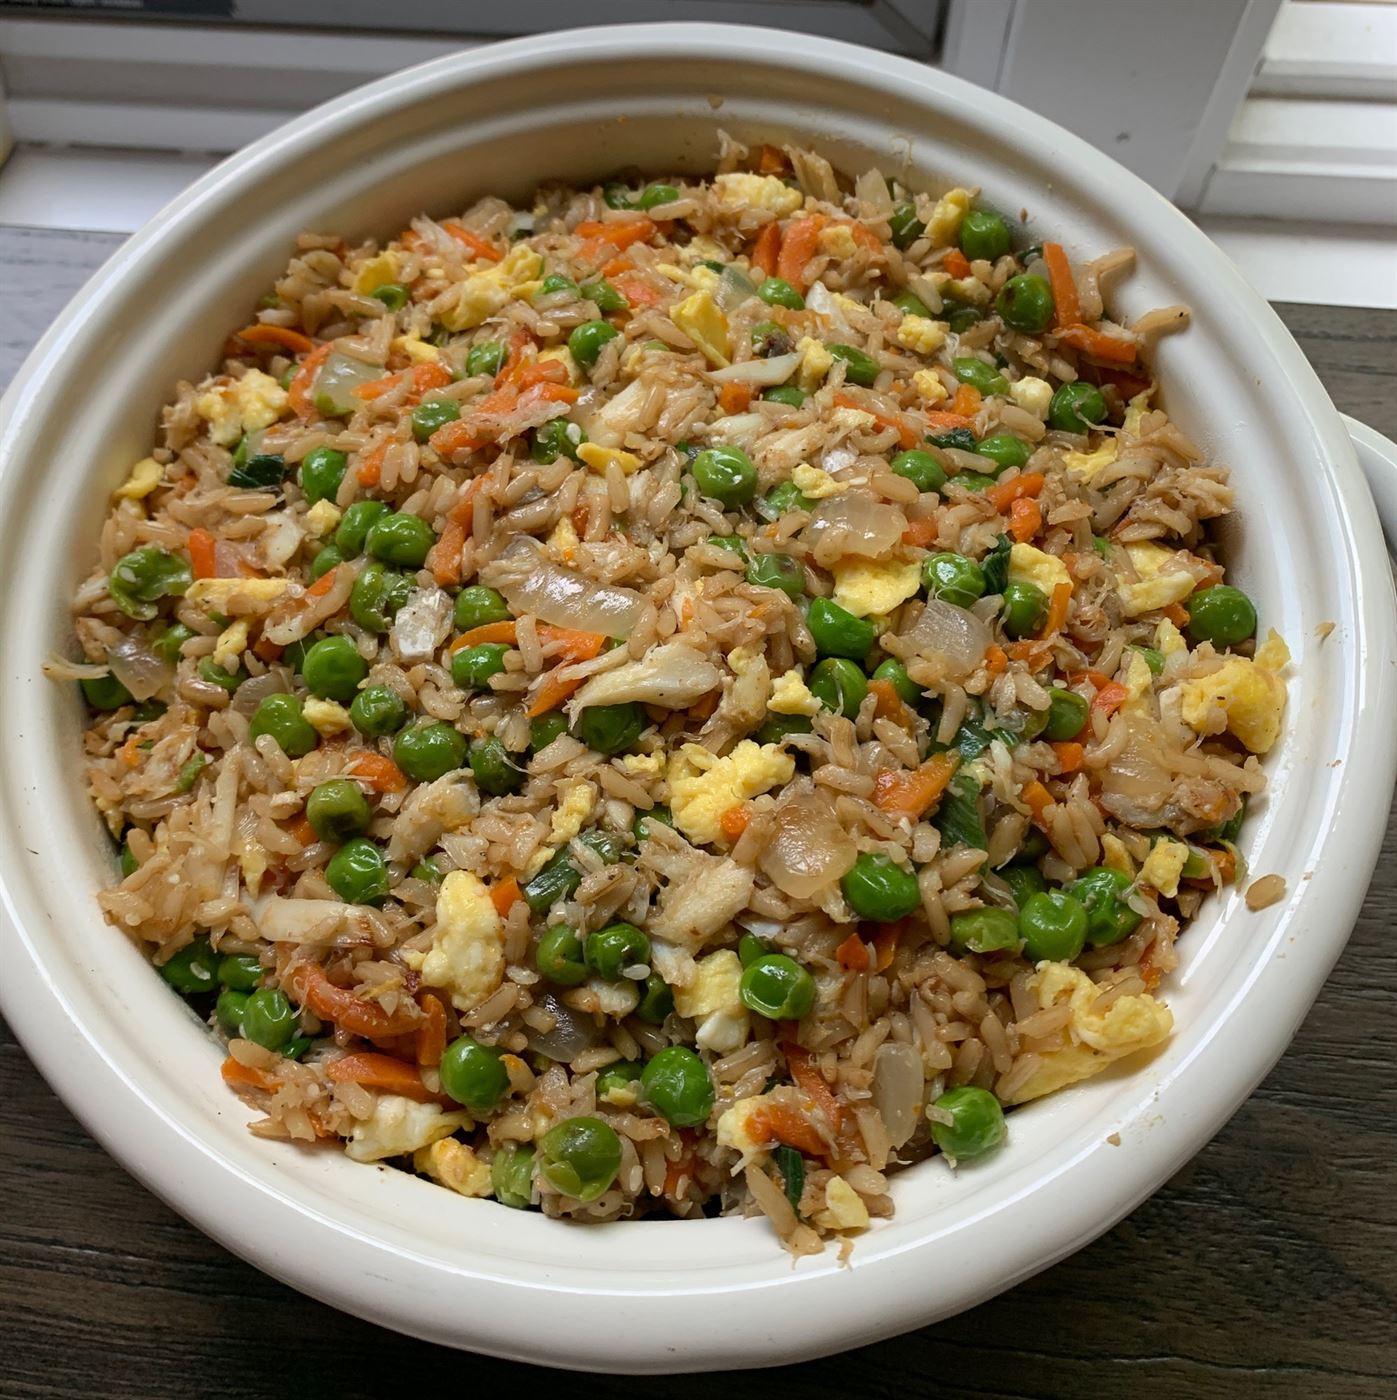 Frozen rice, vegetables and a couple of scrambled eggs are perfect for making this easy fried rice. Samantha Bailey | The Montclarion